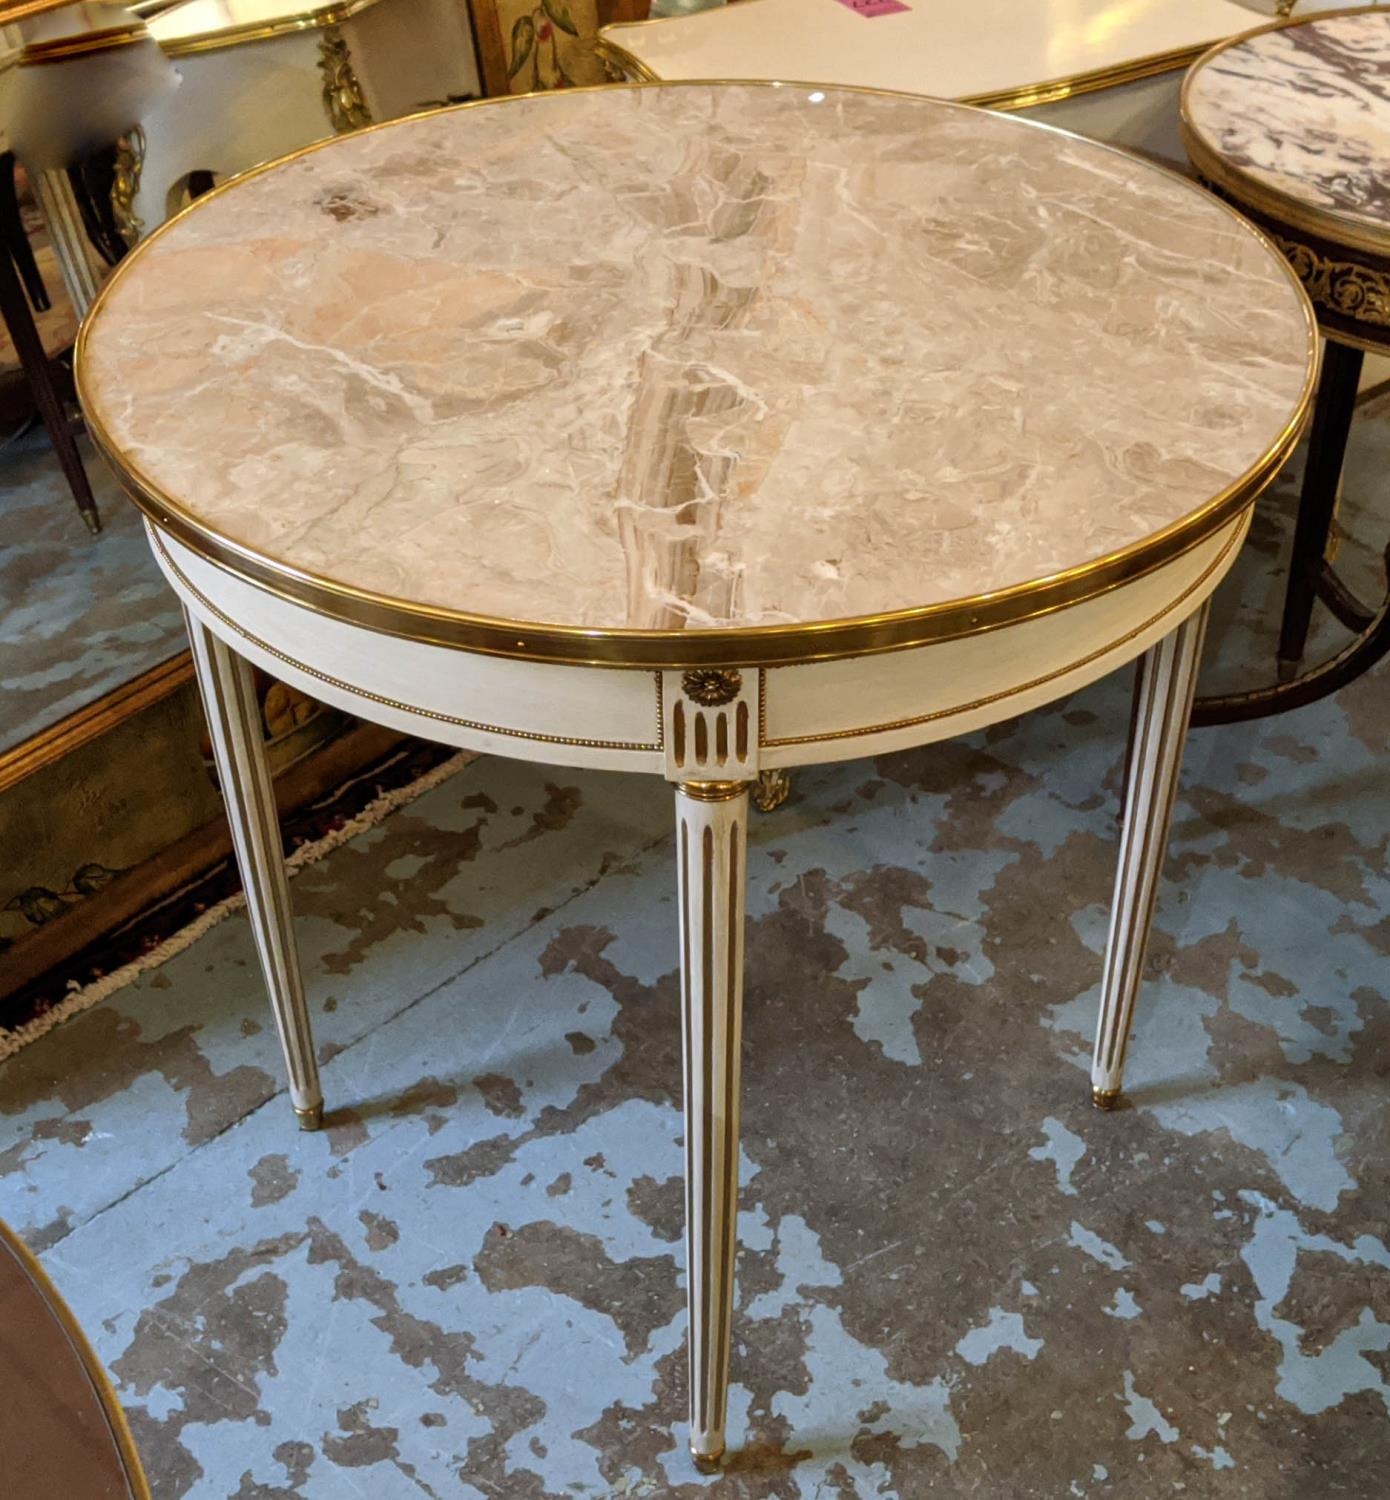 CENTRE TABLE, 81cm x 81cm H, Louis XVI style, the circular marble top on a painted base, with gilt